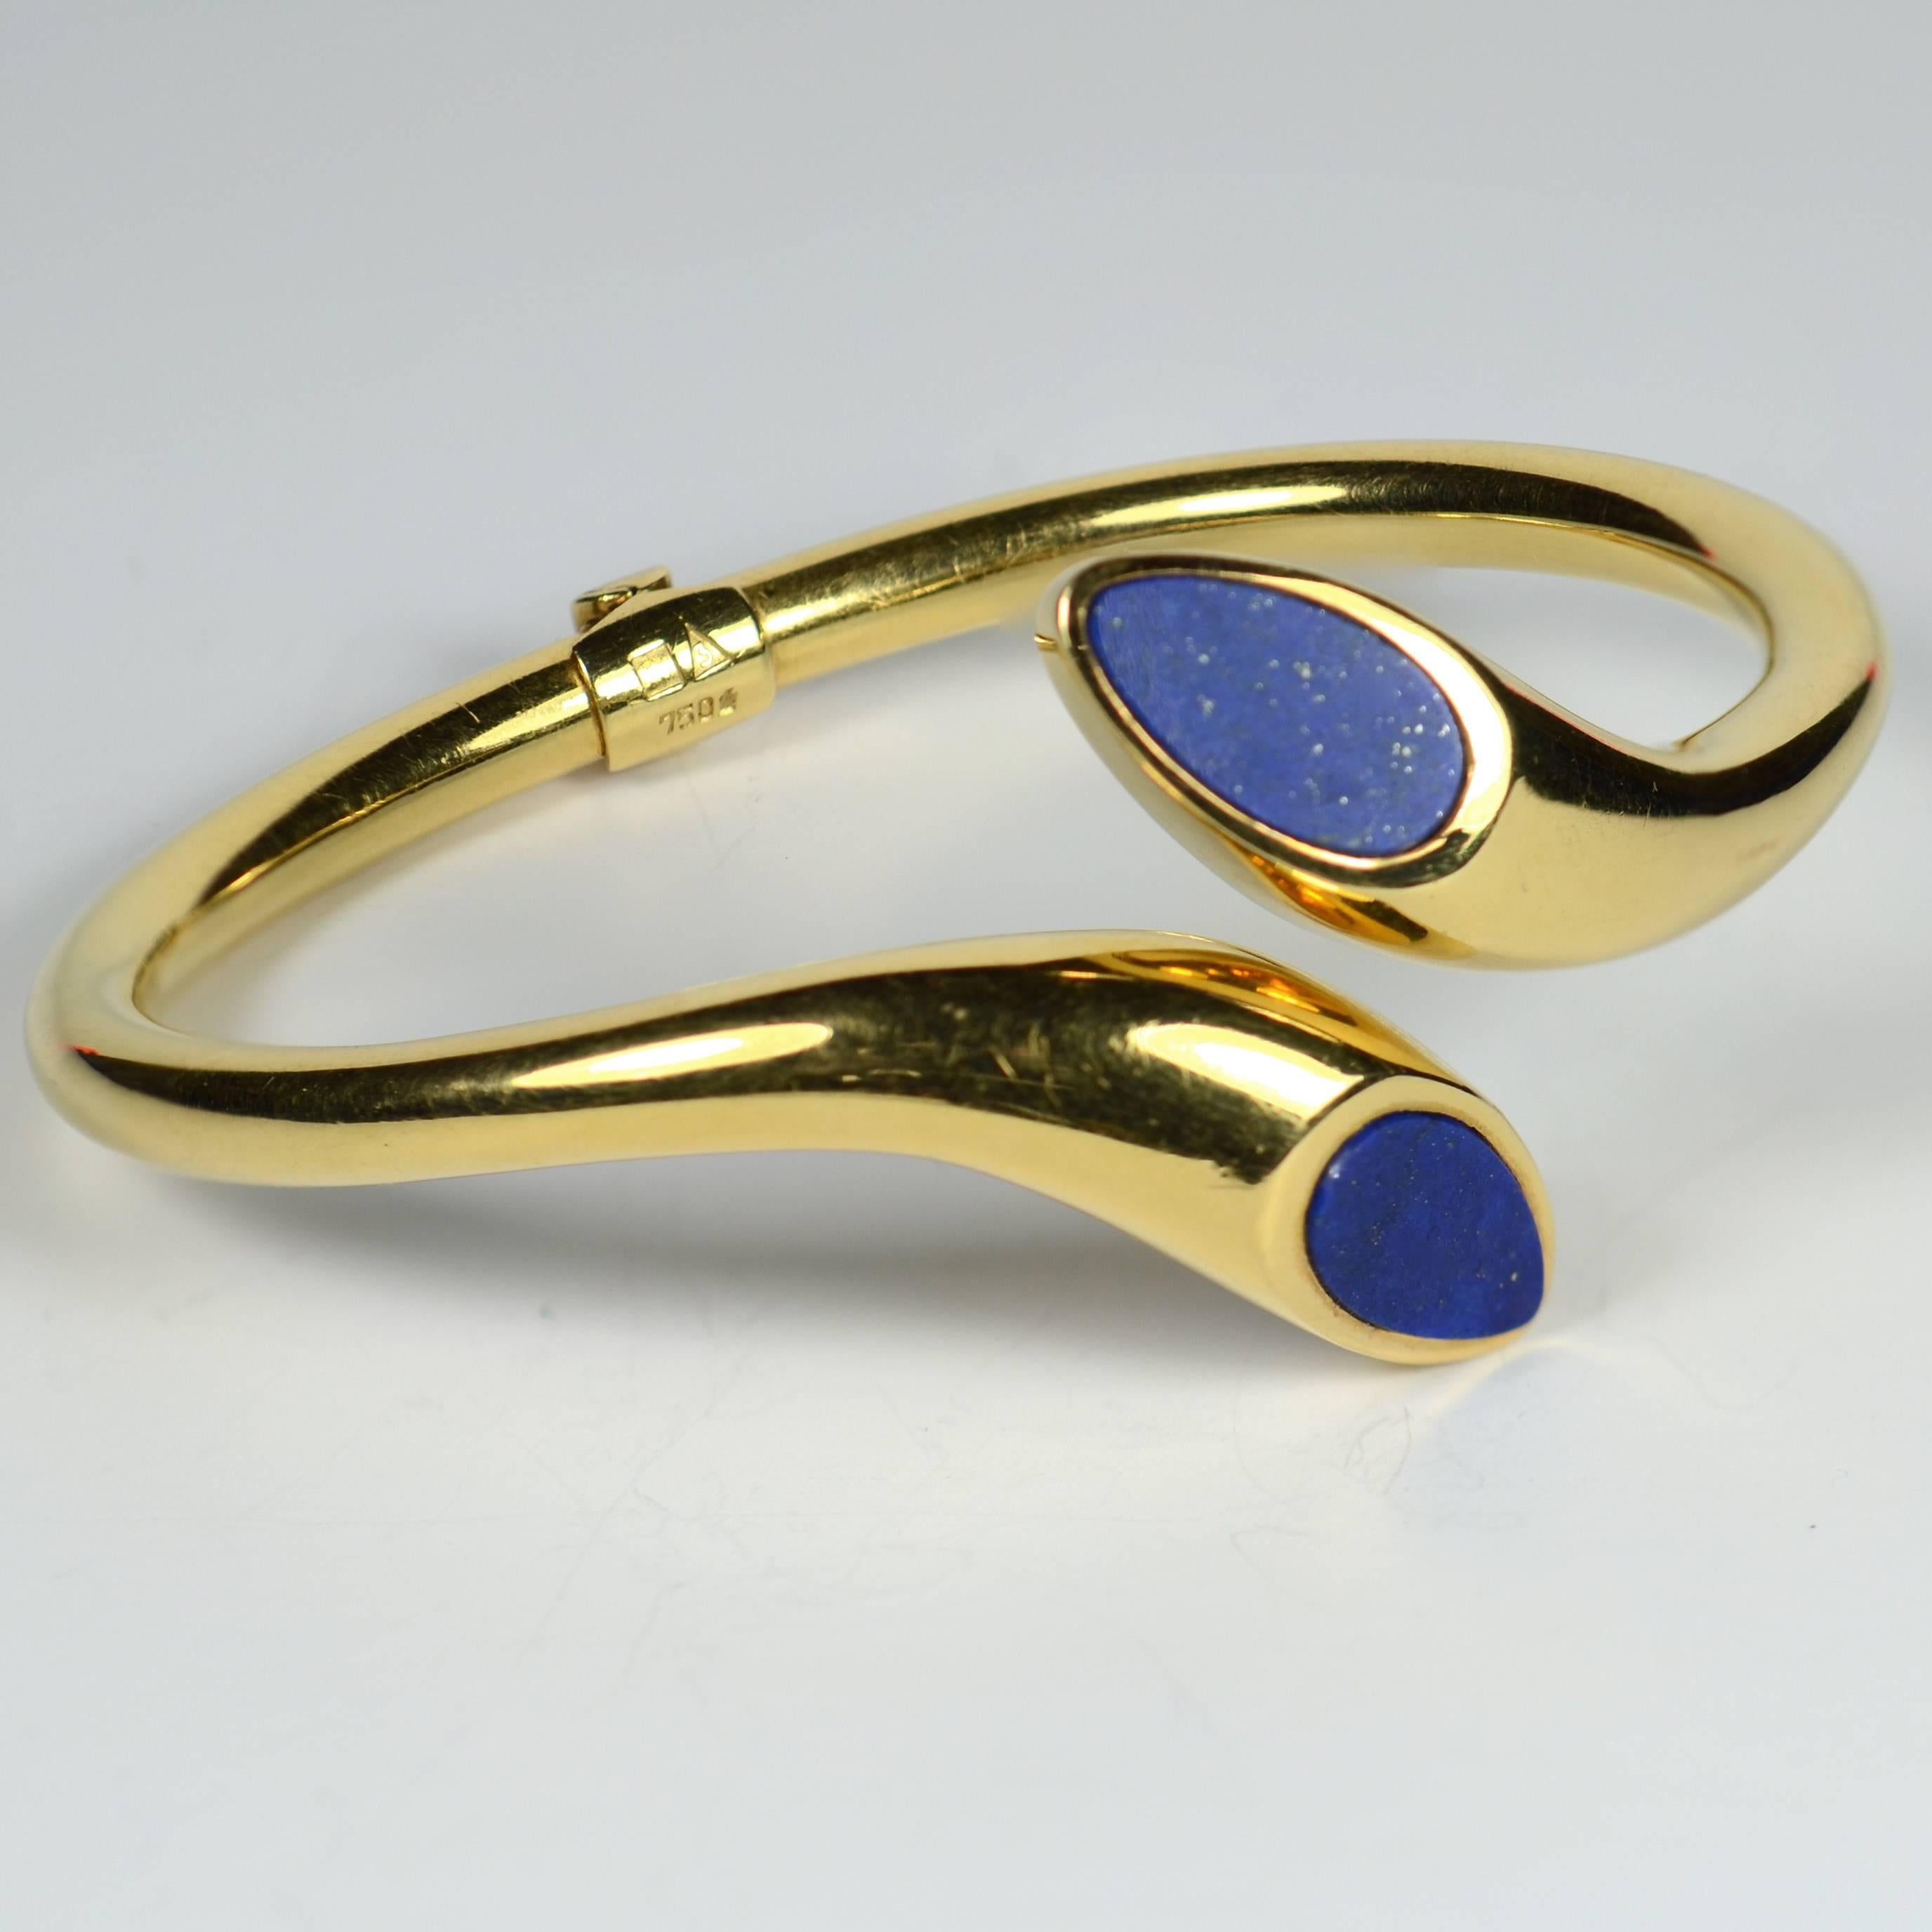 A hinged cuff bangle set with a pear-shaped blue lapis lazuli tablet to each tapered gold terminal. 

The bracelet has an inner circumference of 16.5cm (6.5 inches), with an inner diameter of 5.9cm.

Marked 750 for 18 karat gold. Weight: 32.3g. 
